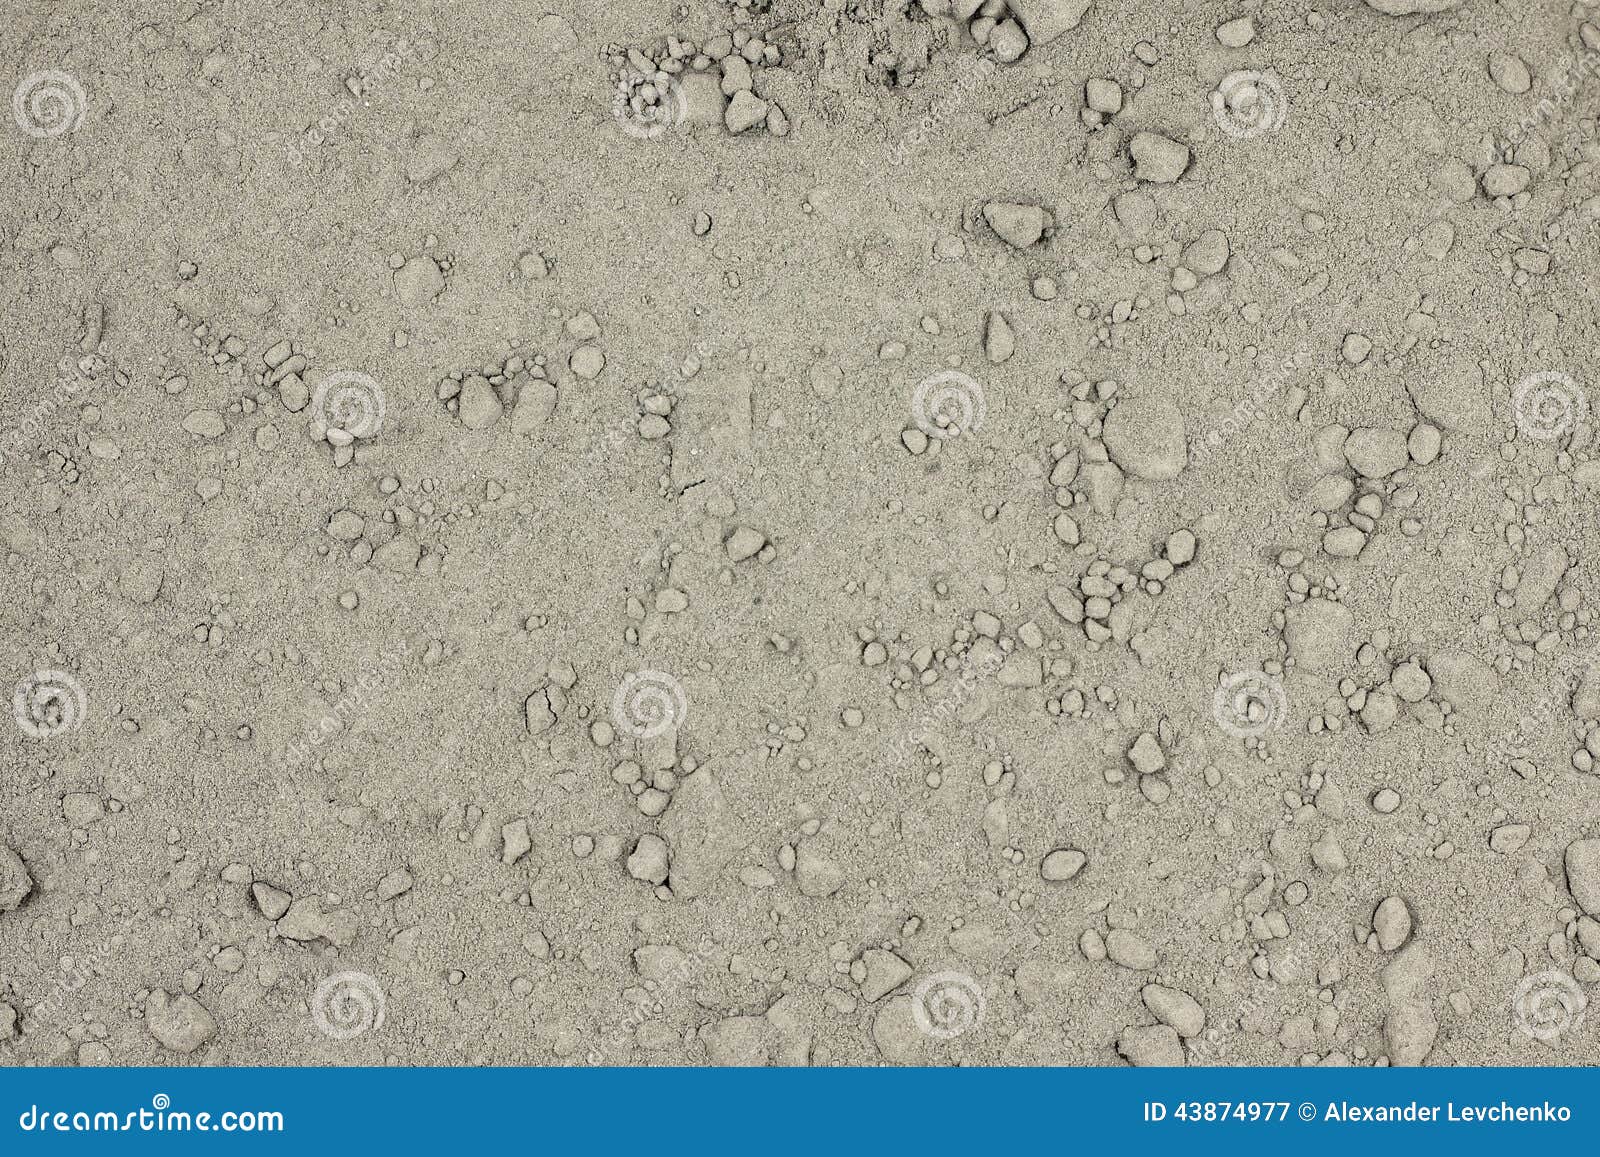 Gray cement powder stock image. Image of gray, abstraction - 43874977